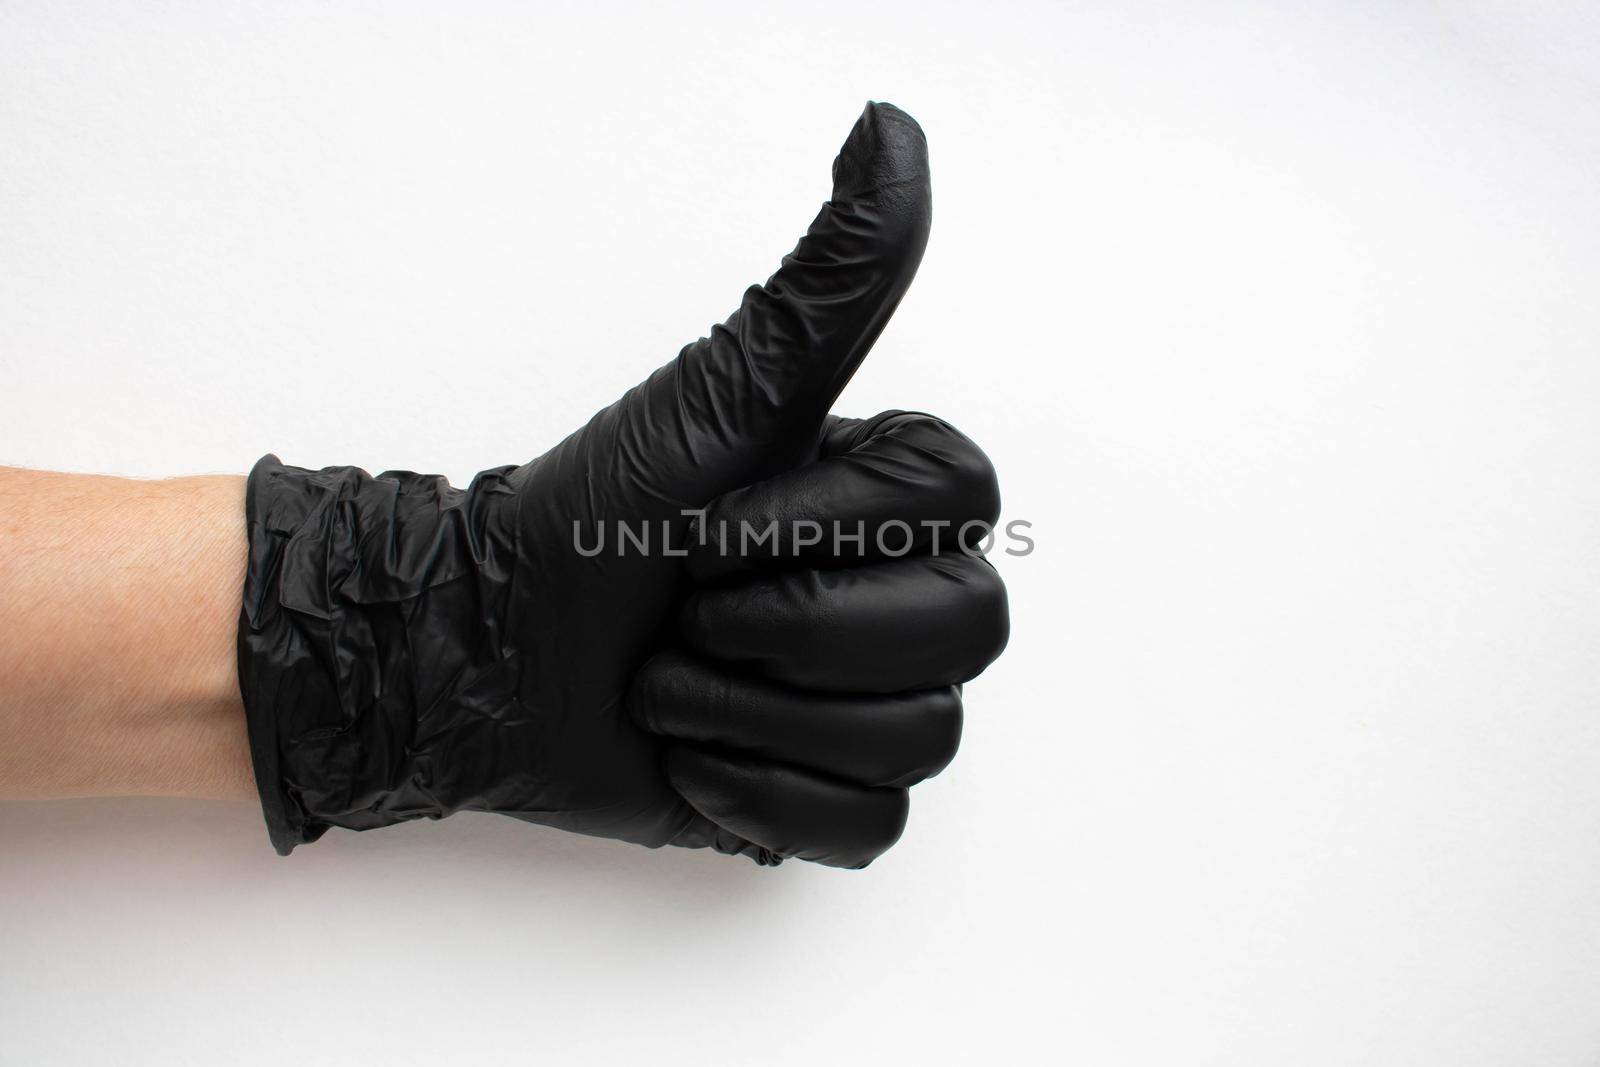 Hand in a black surgical medical glove, isolated on a white background. Production of rubber protective gloves.Hygiene and sanitary standards.